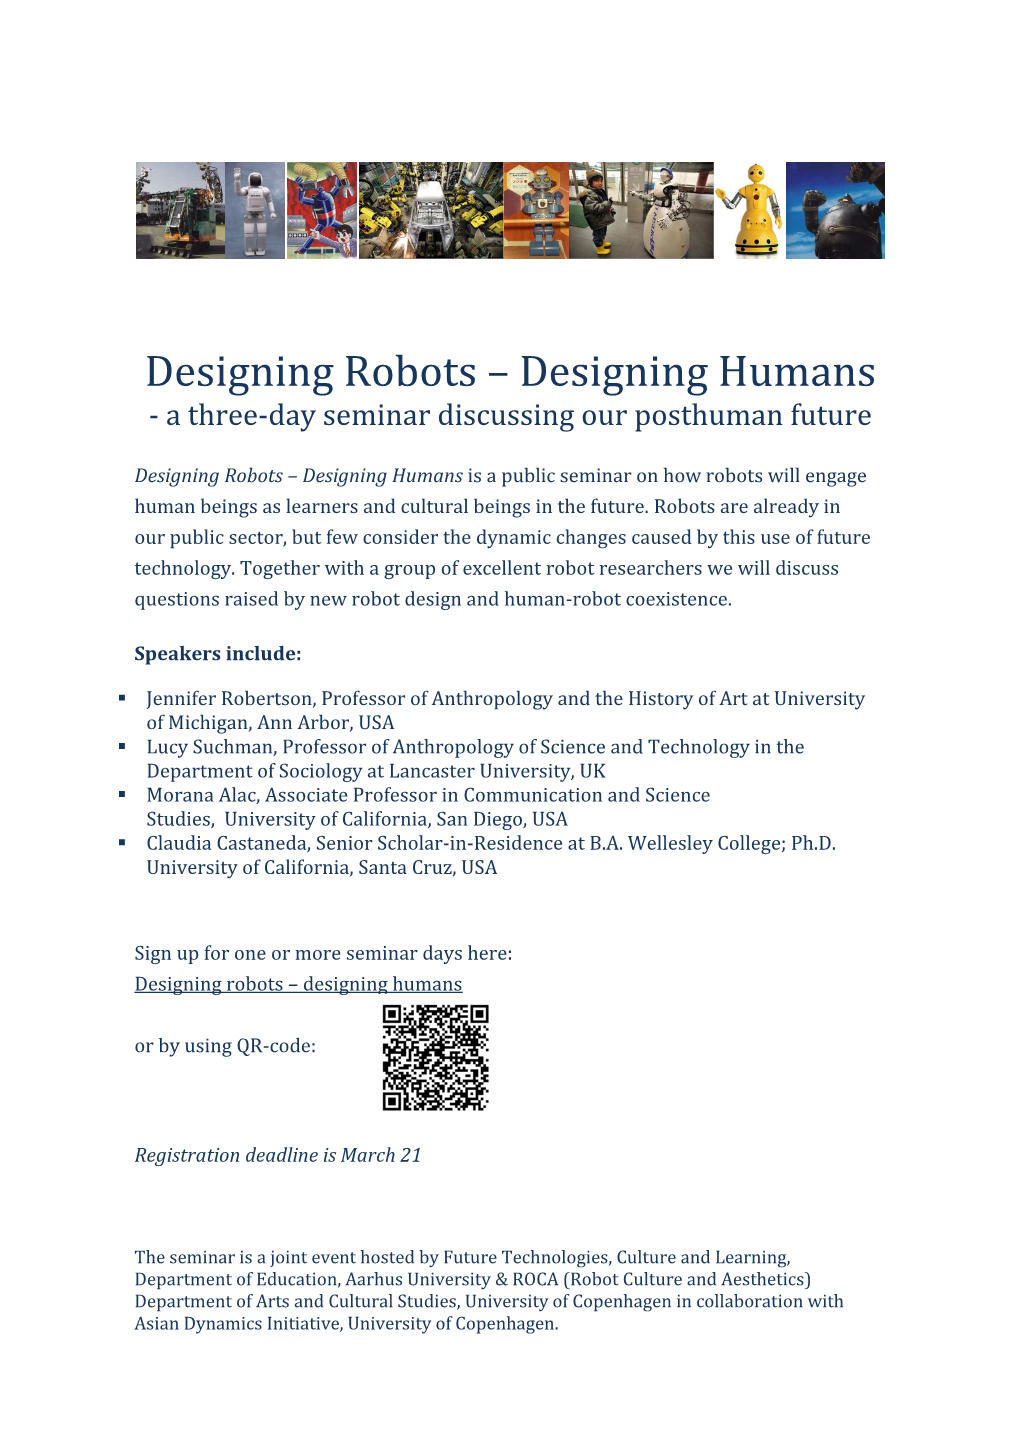 Designing Robots – Designing Humans - a Three-Day Seminar Discussing Our Posthuman Future